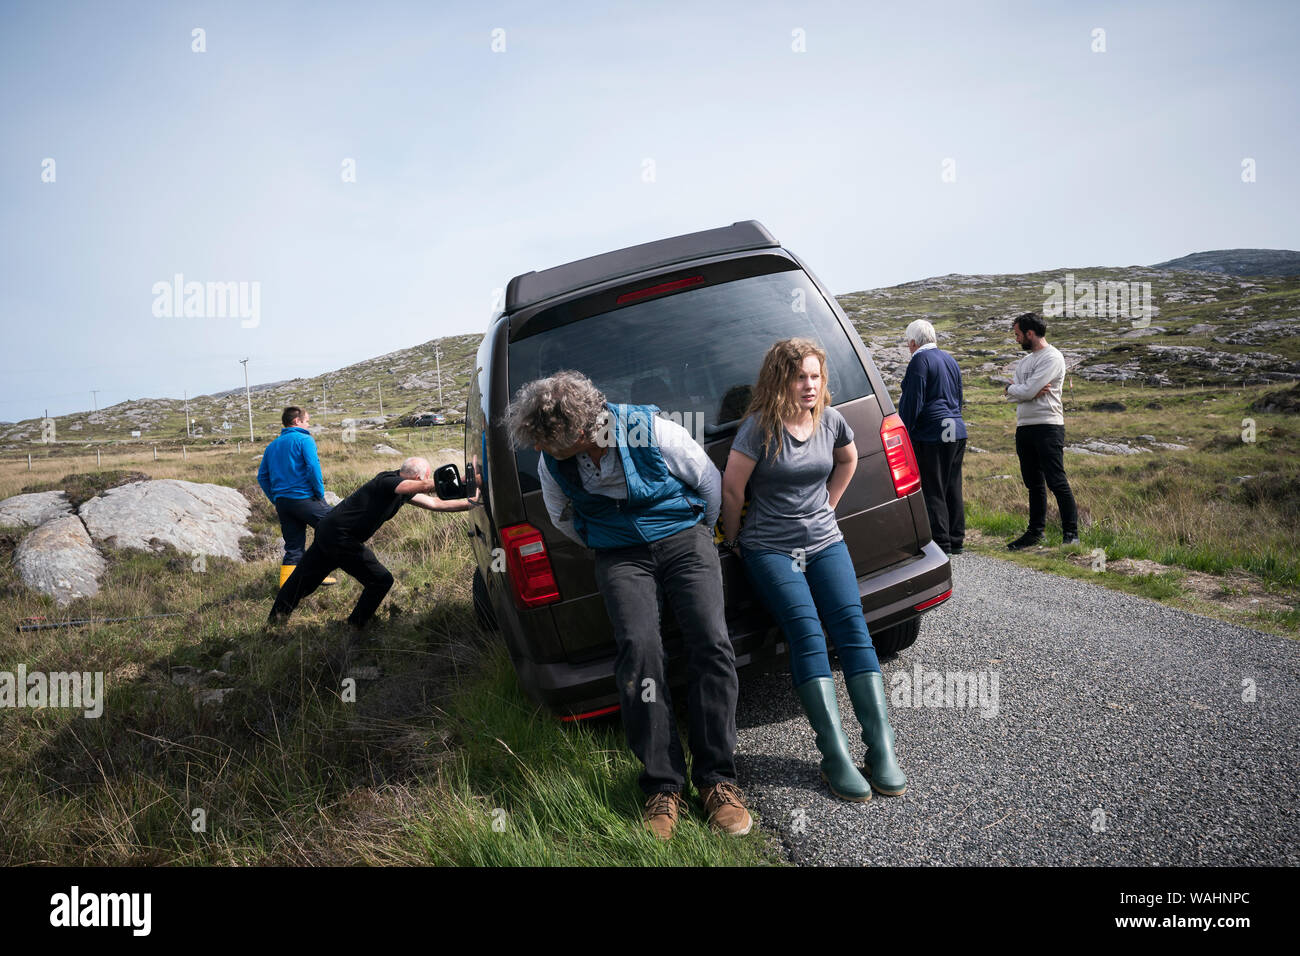 Man and teenage girl push the back end of a car rental stuck in the ditch as other tourists watch from the sidelines as another adult man pushes the f Stock Photo